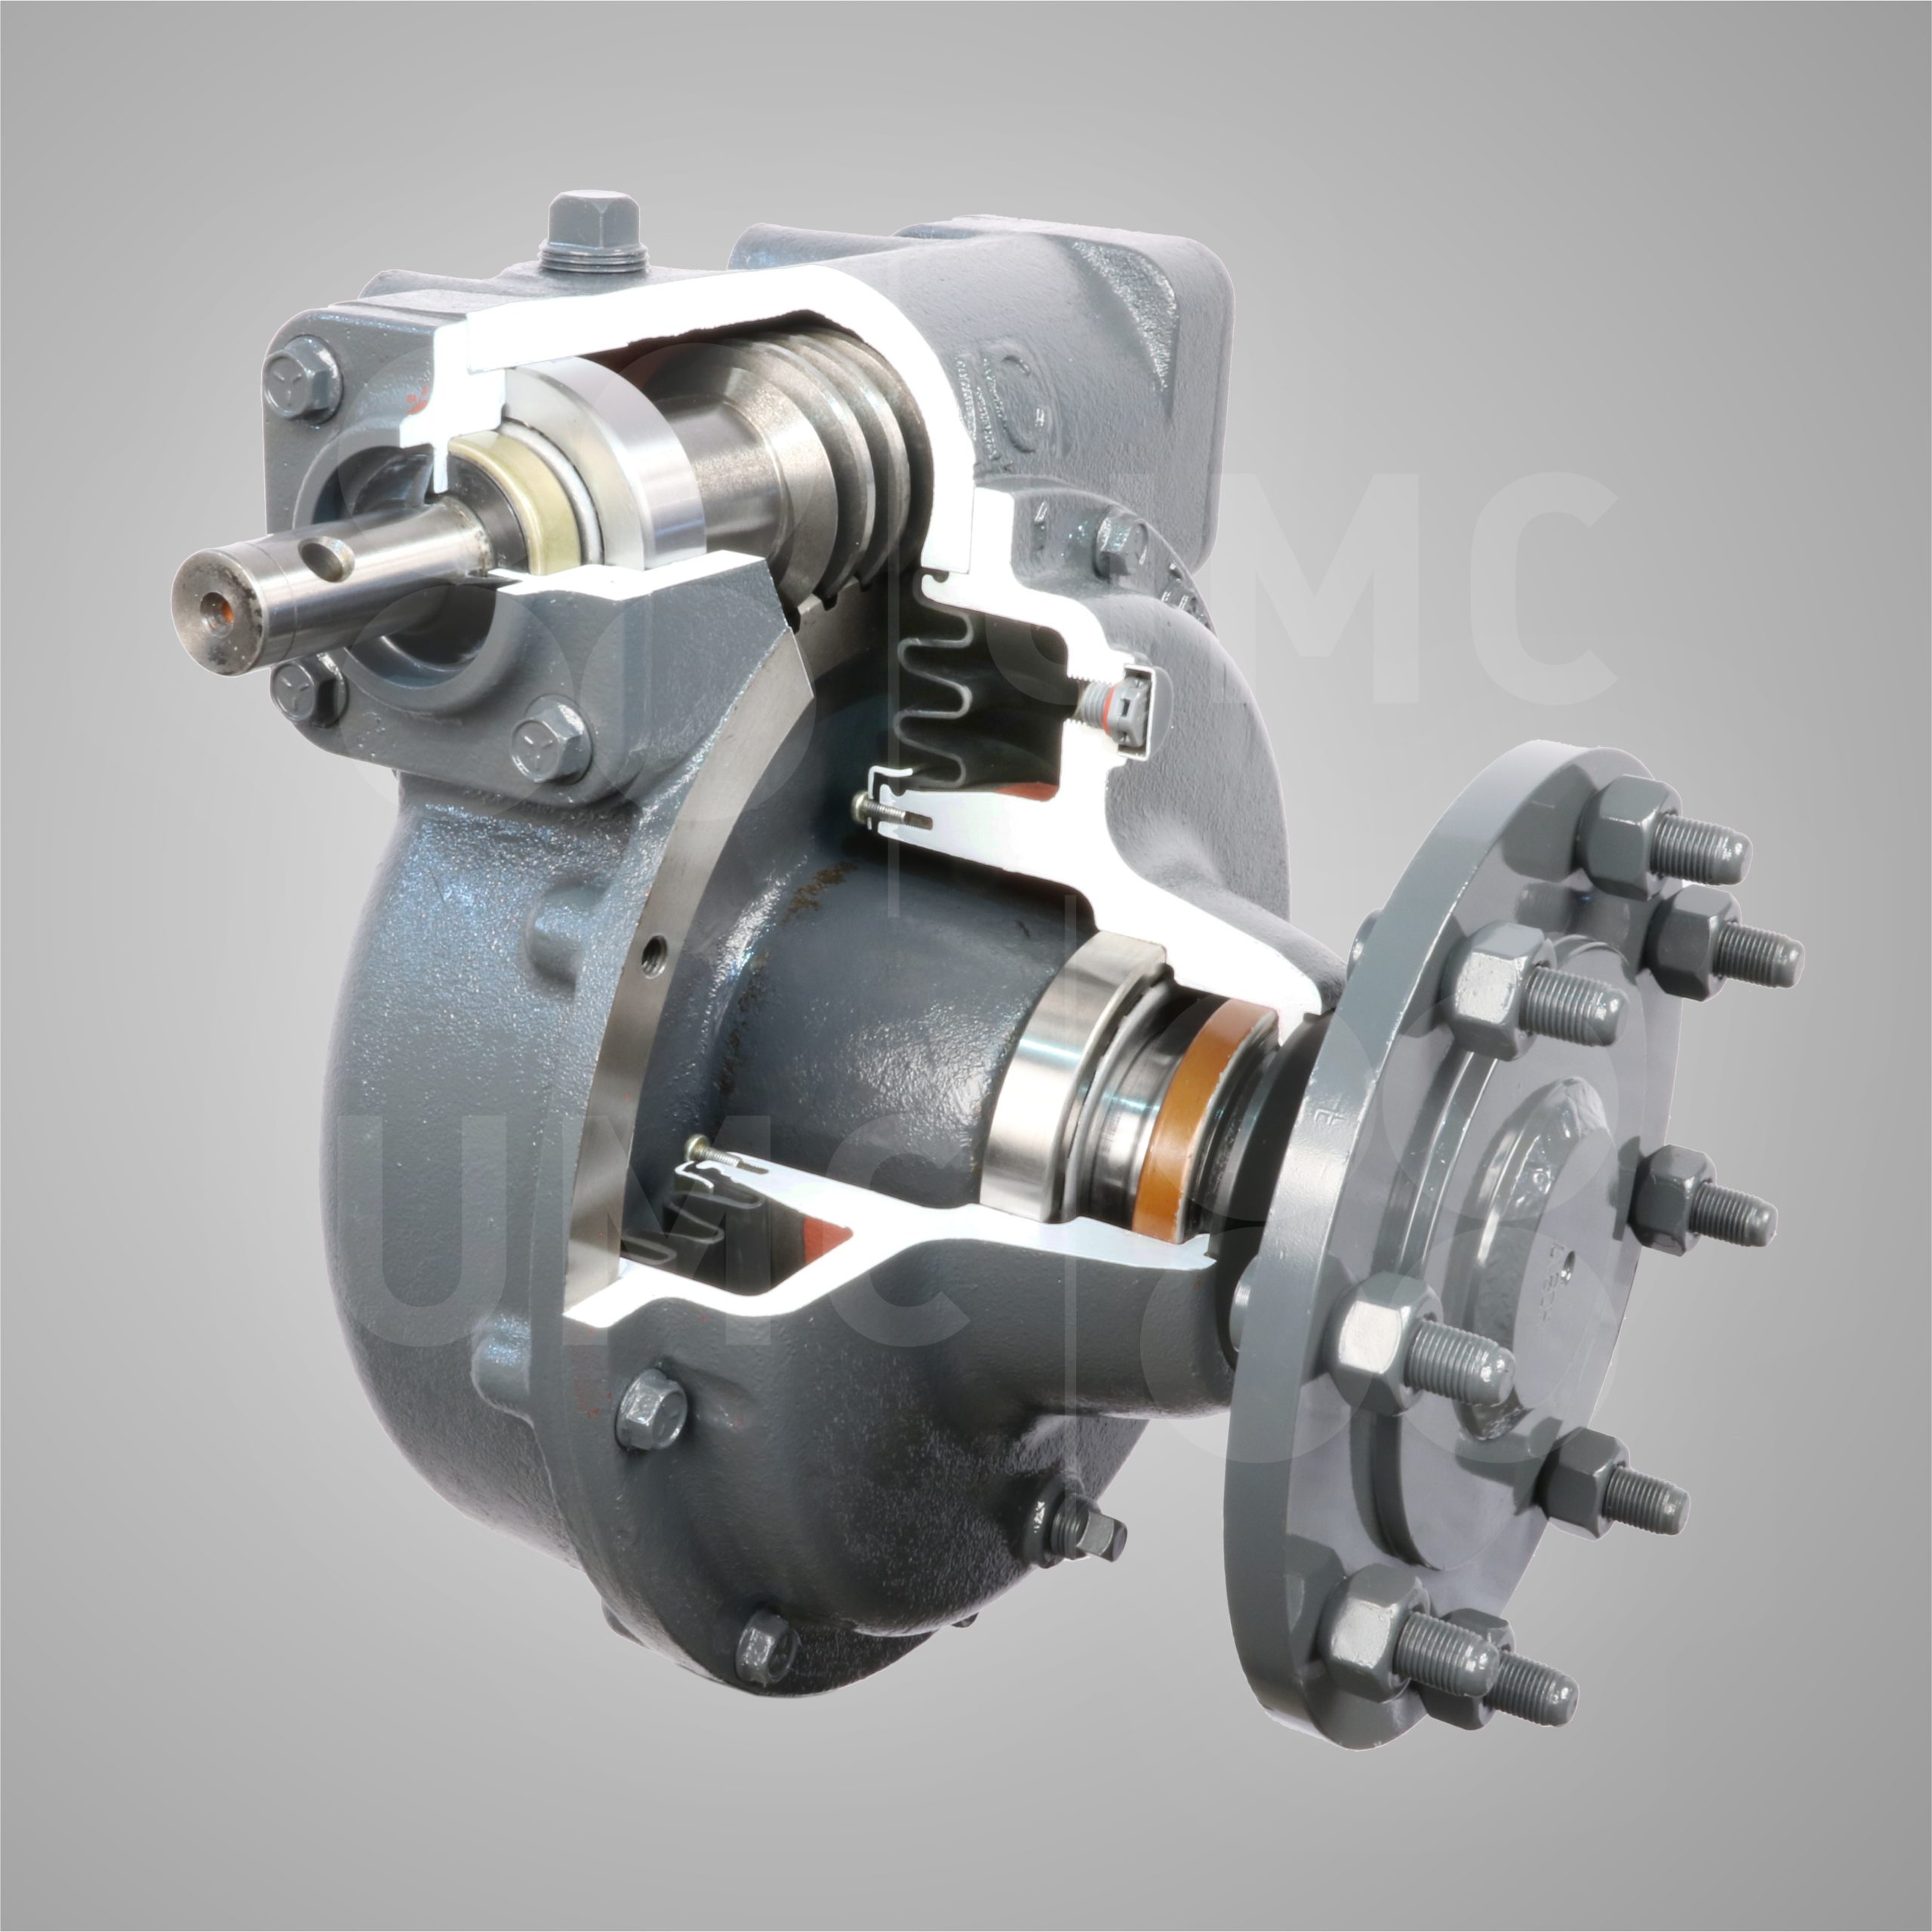 765-U-AD™ Gearbox | Universal Motion Components Co., Inc.